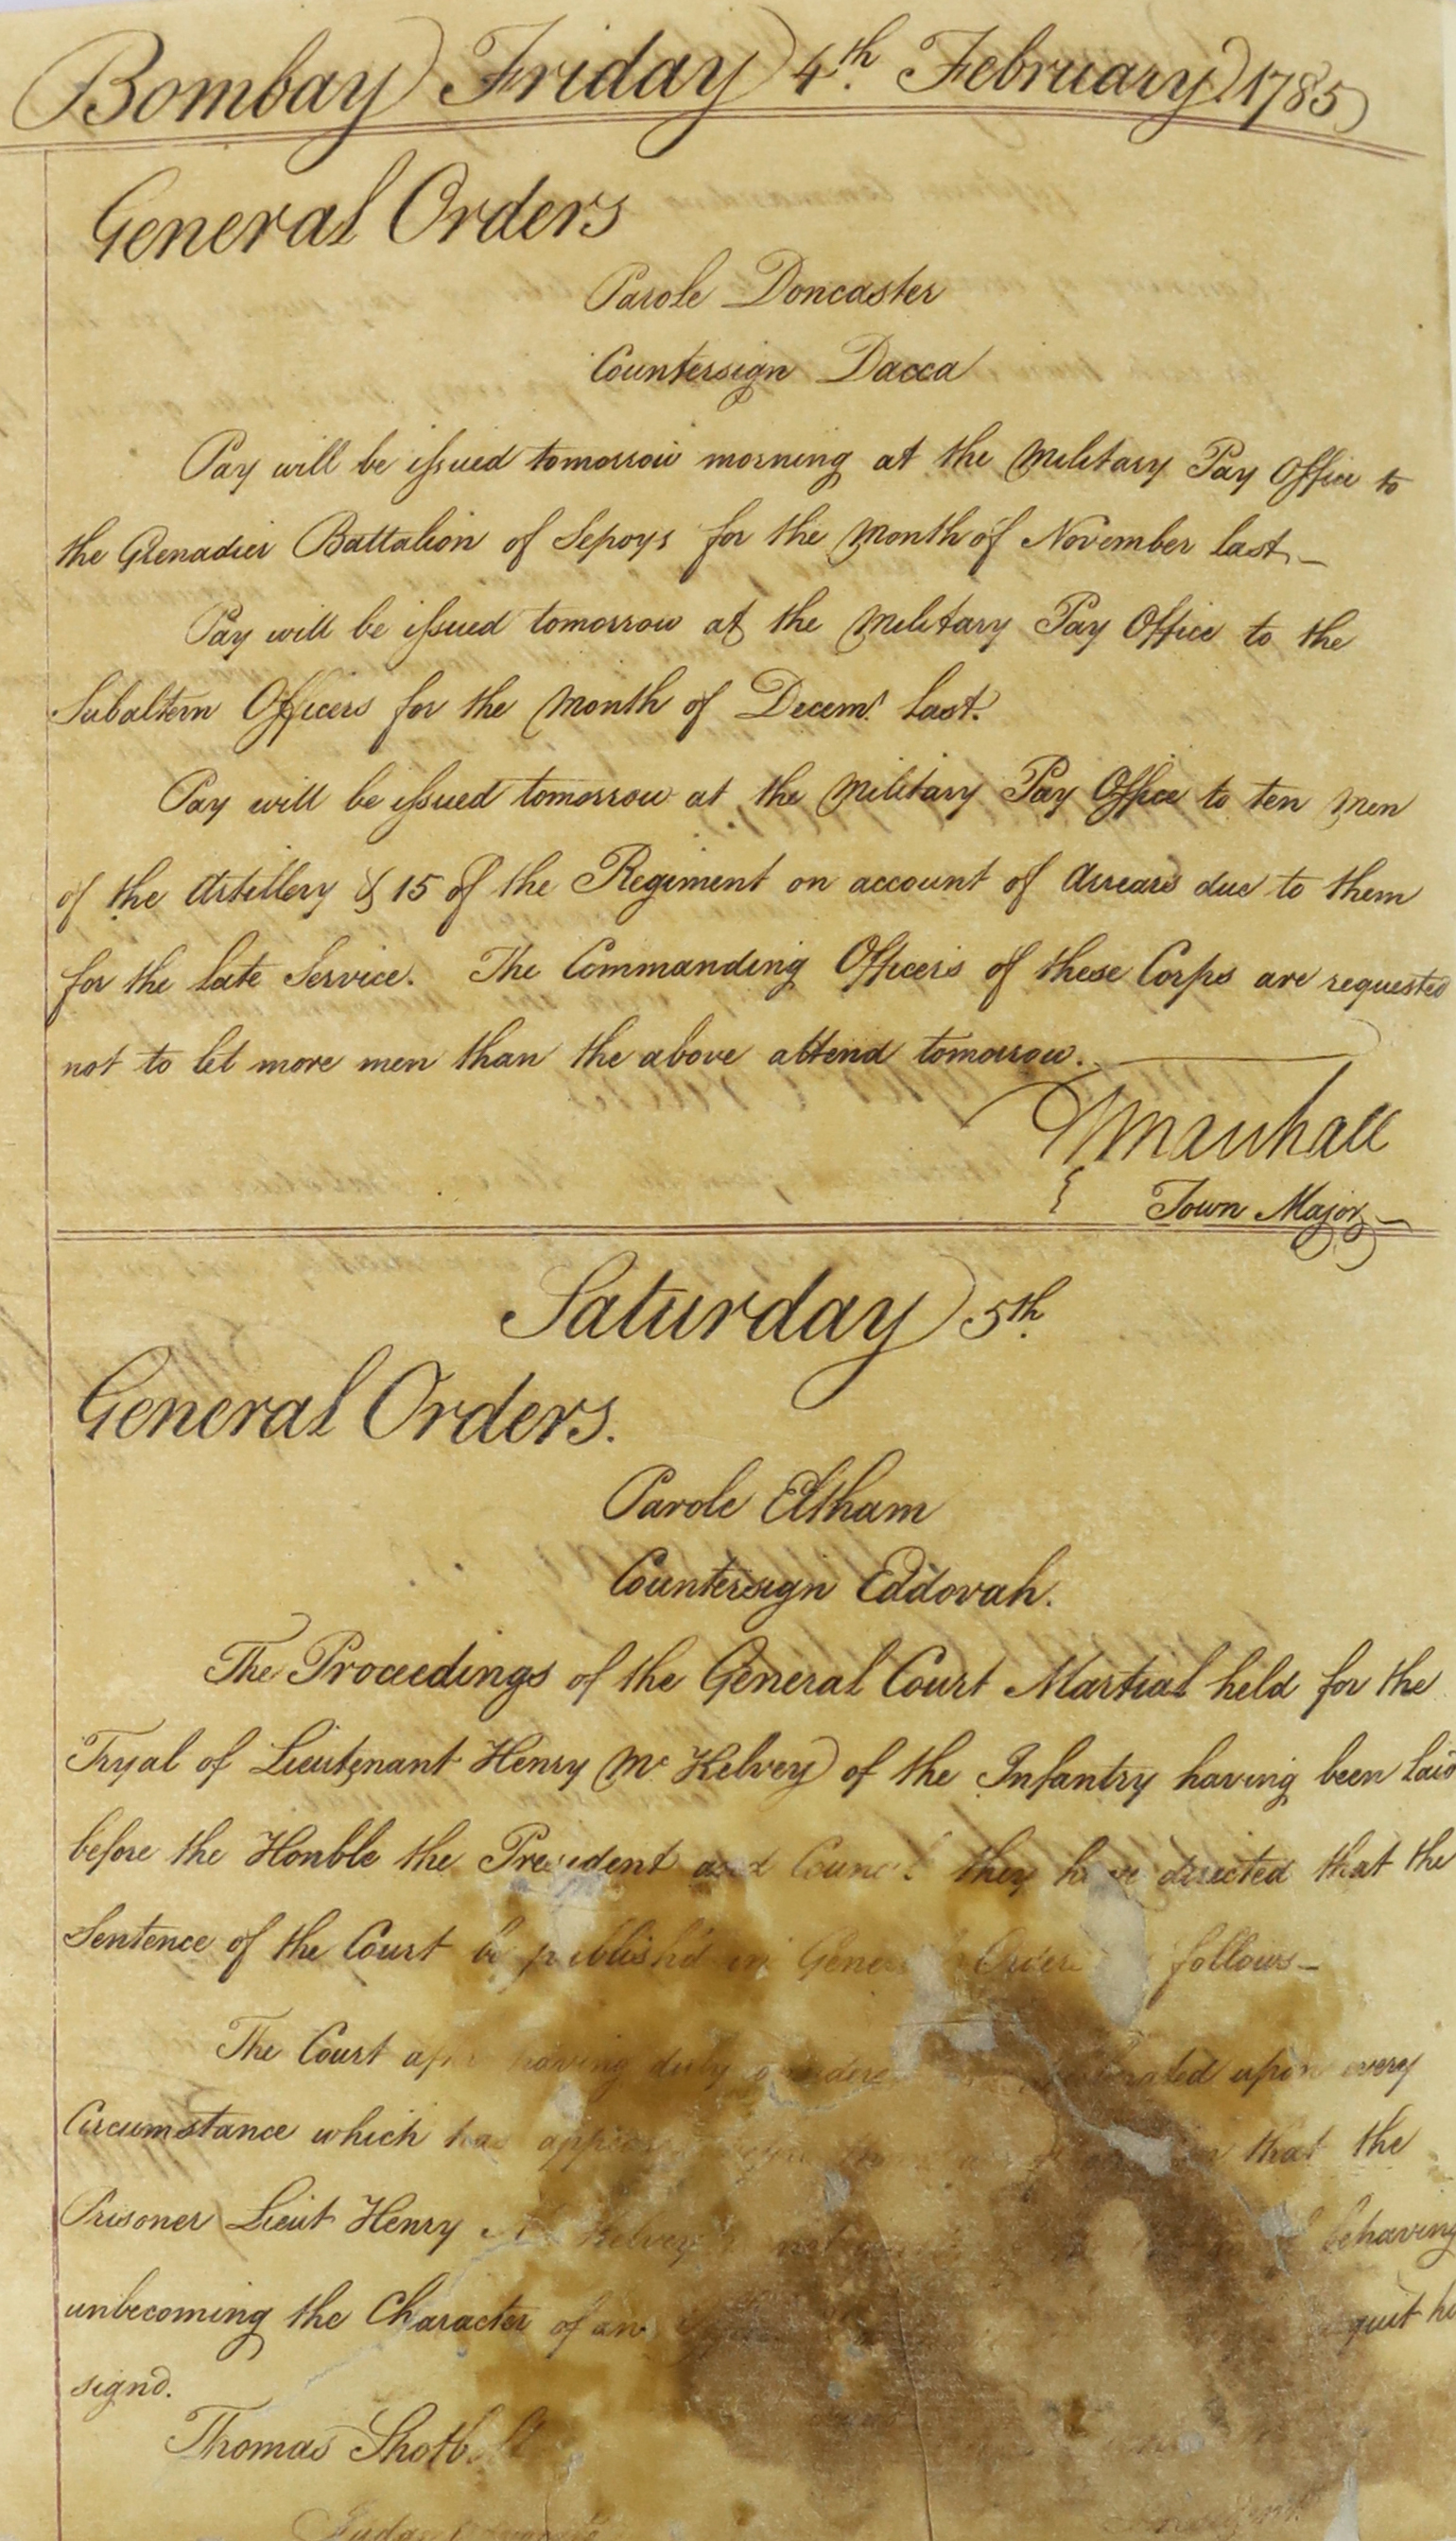 Brigade and General Orders Book, Bombay, 1 March 1784 – 14 March 1785                                                                                                                                                       